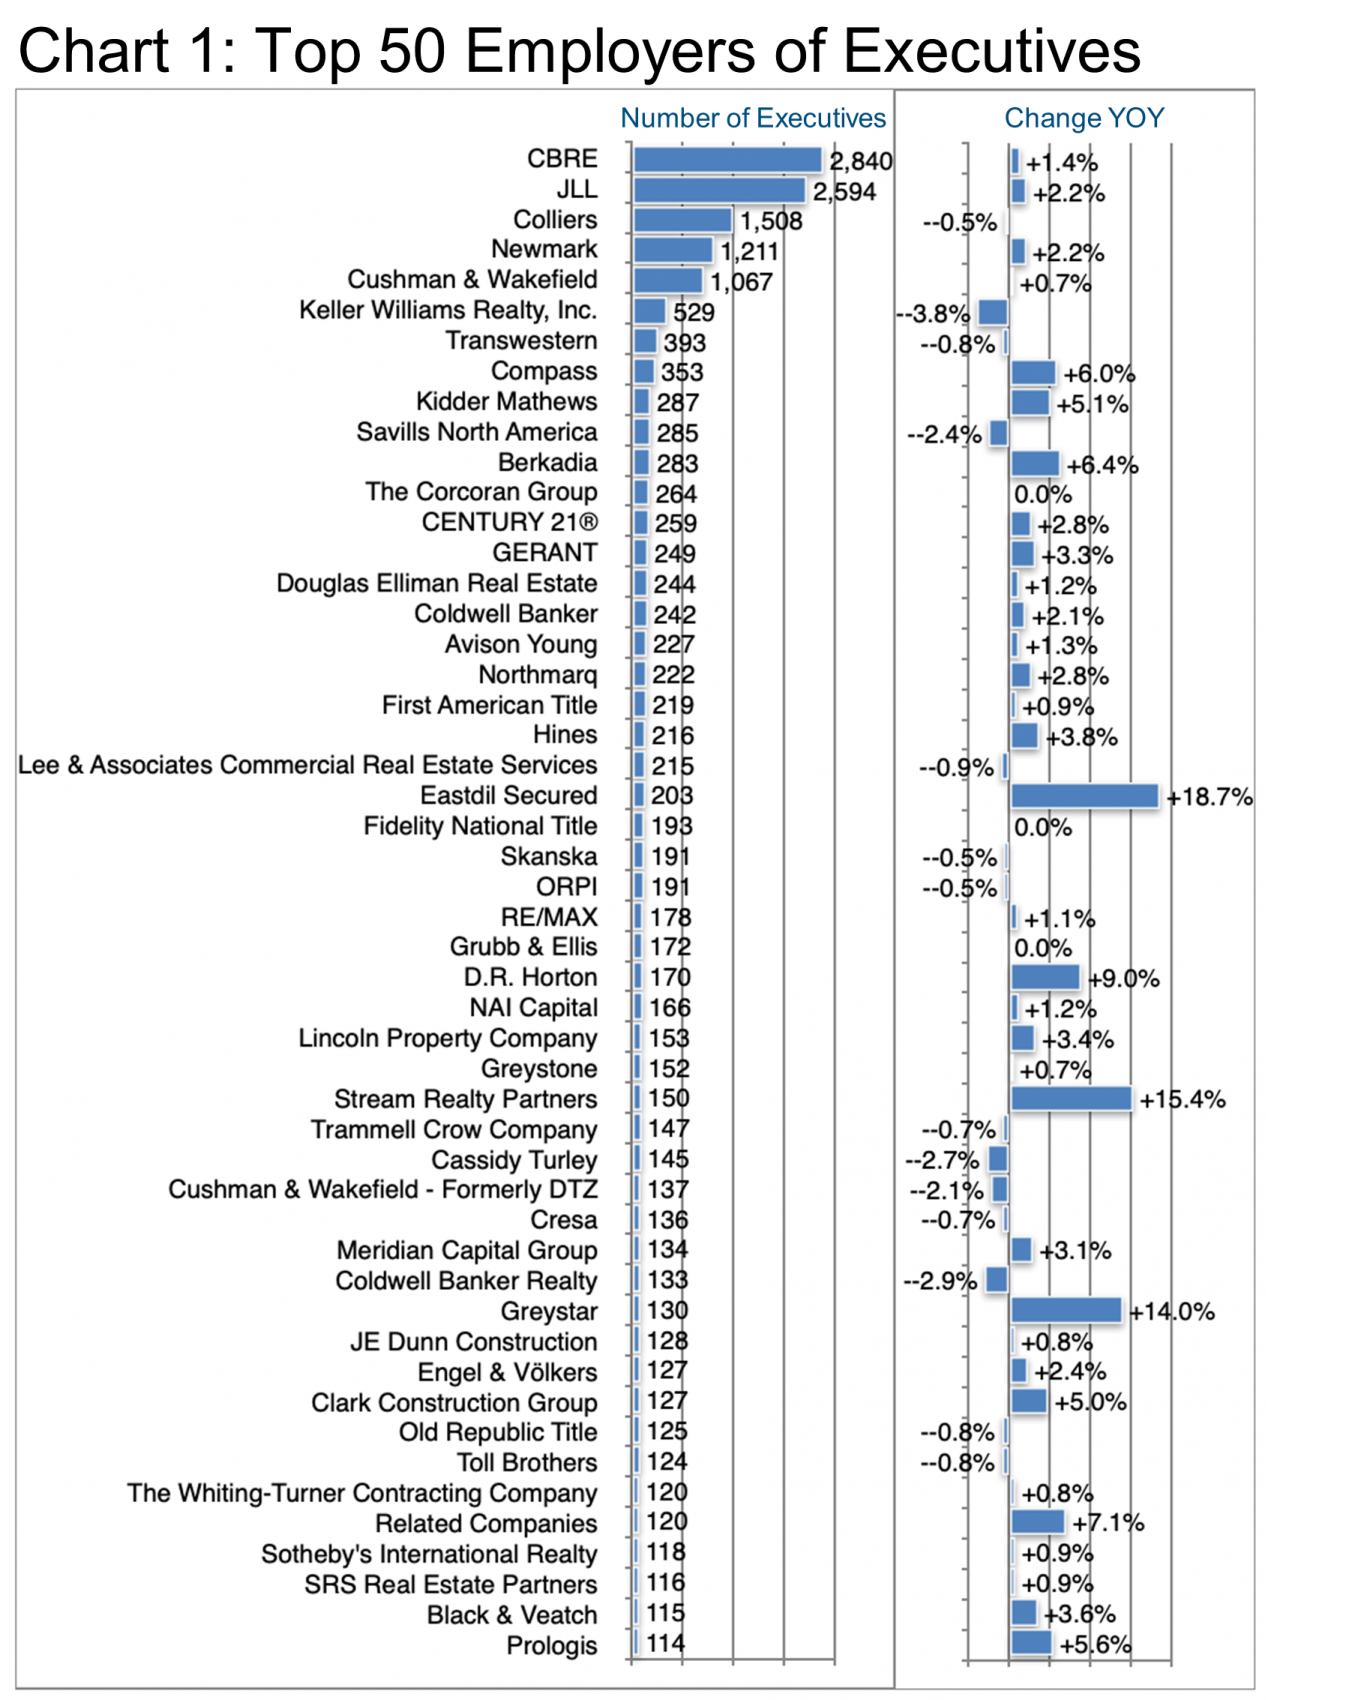 Top 50 Employers of Executives- Chart 1